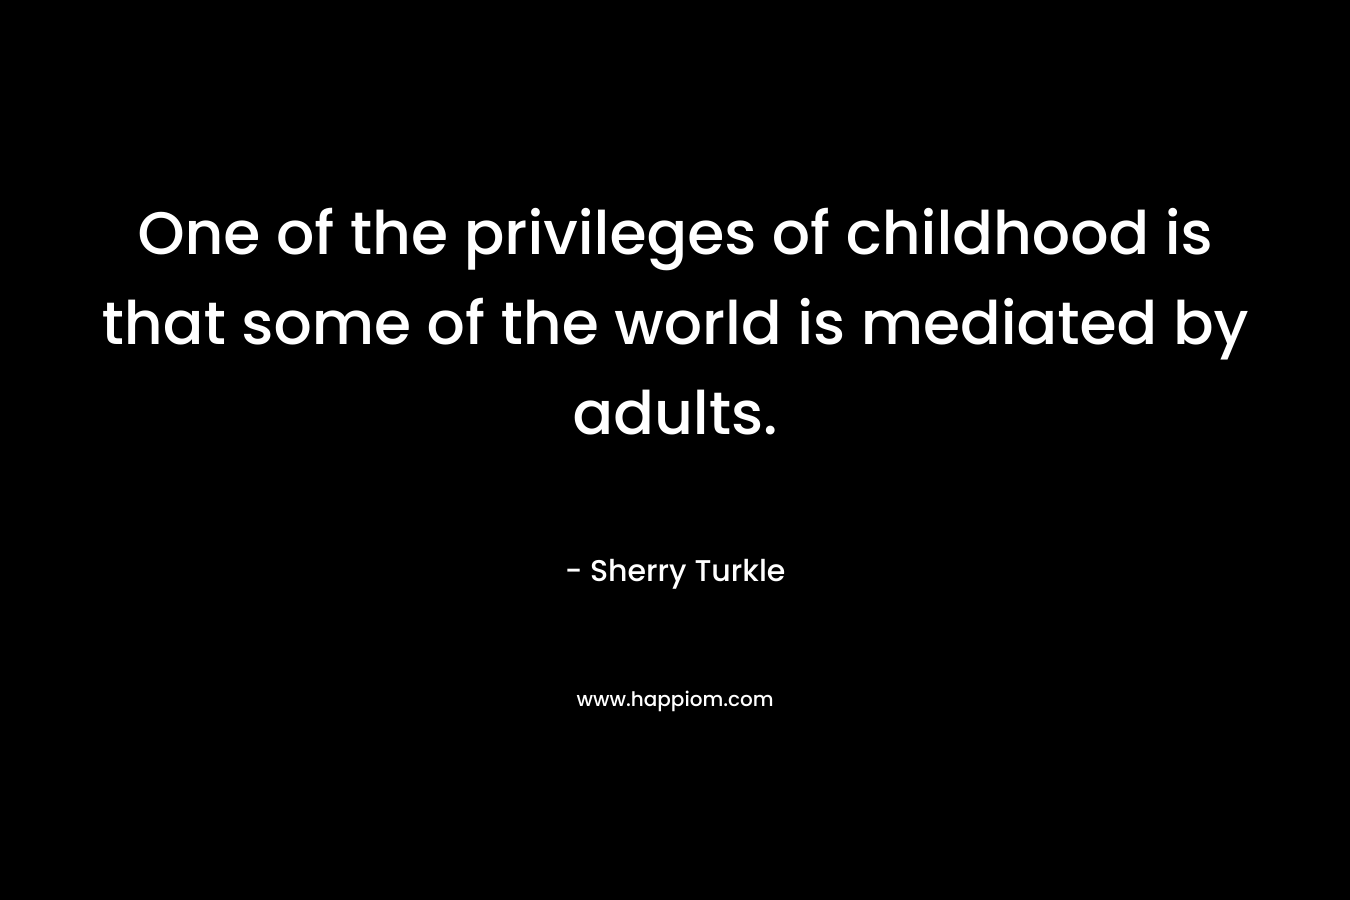 One of the privileges of childhood is that some of the world is mediated by adults.